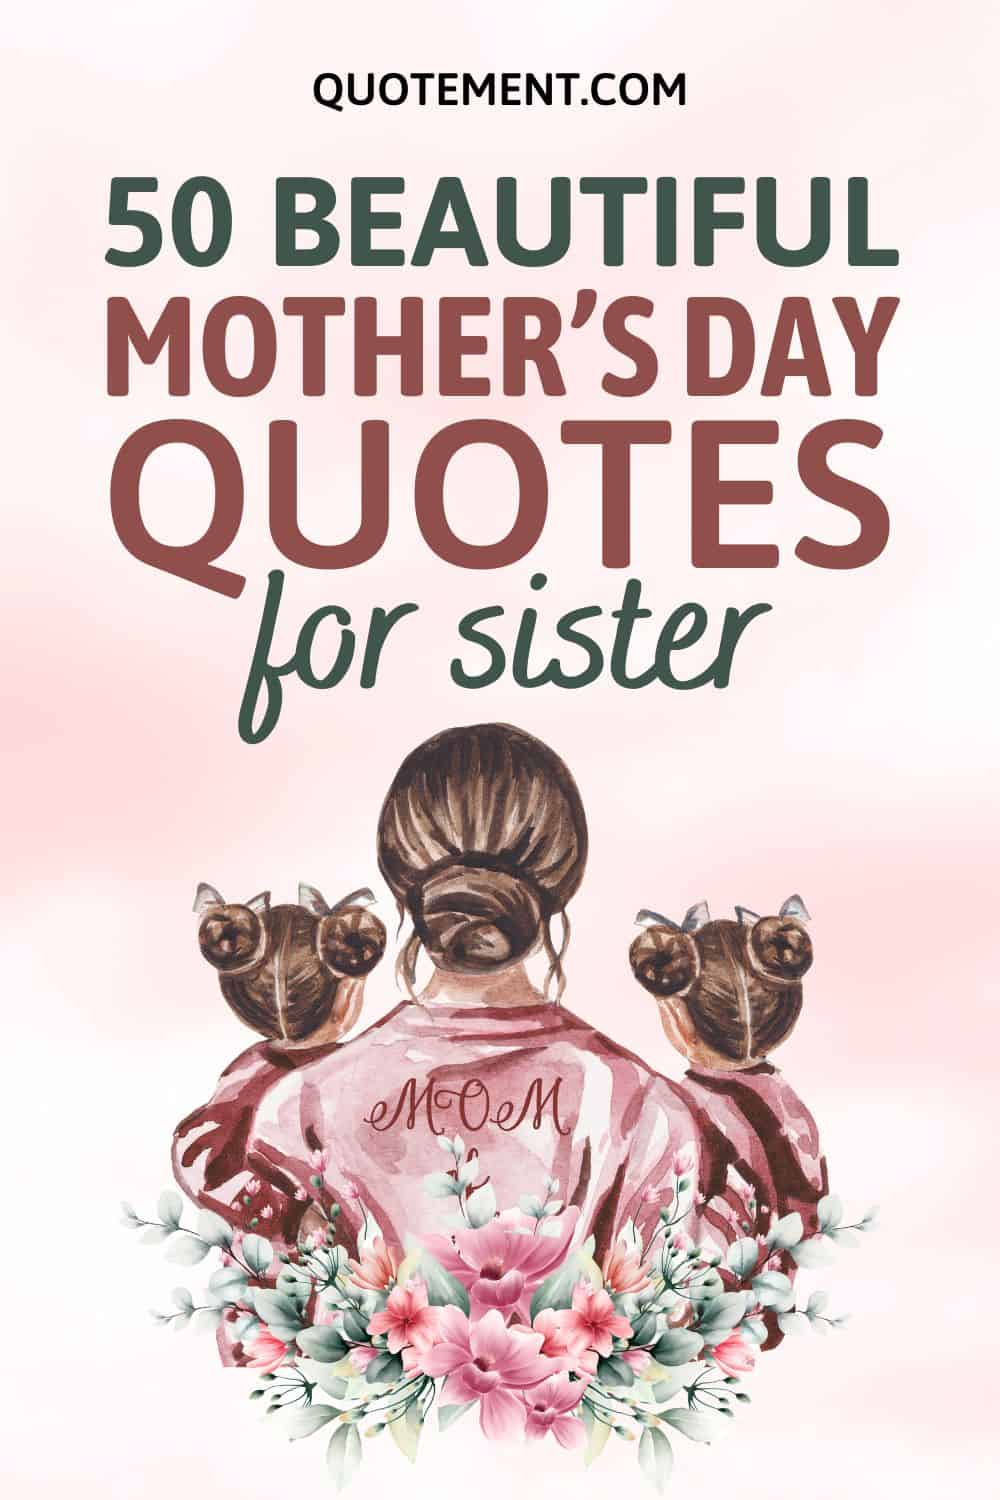 50 Beautiful And Touching Mother’s Day Quotes For Sister
